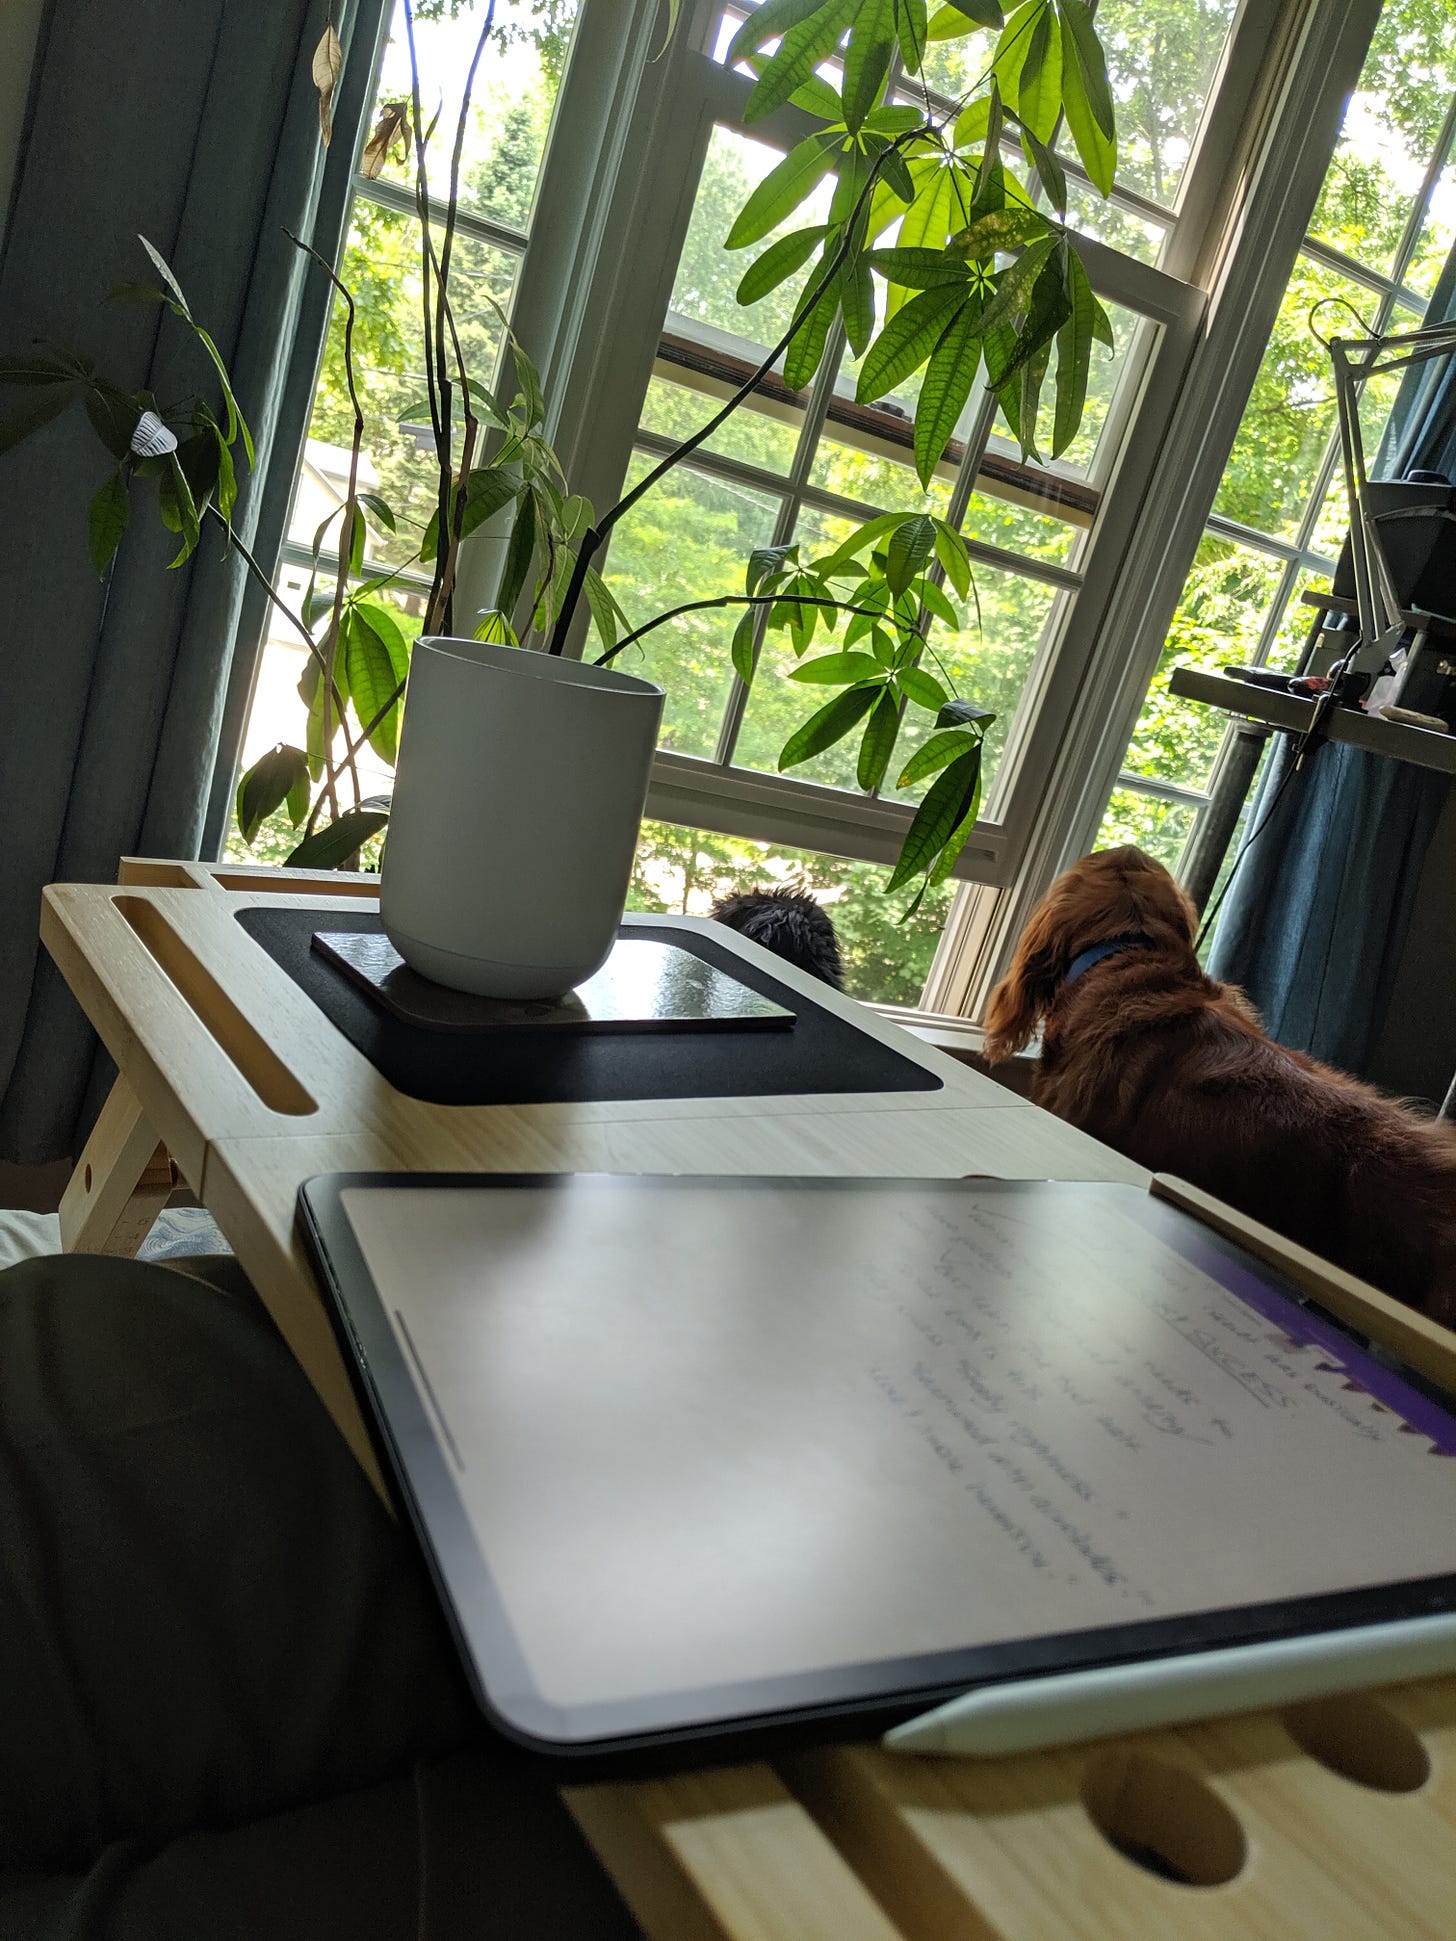 A photo of Susan's lap desk, a coffee, and her two dogs staring out a window